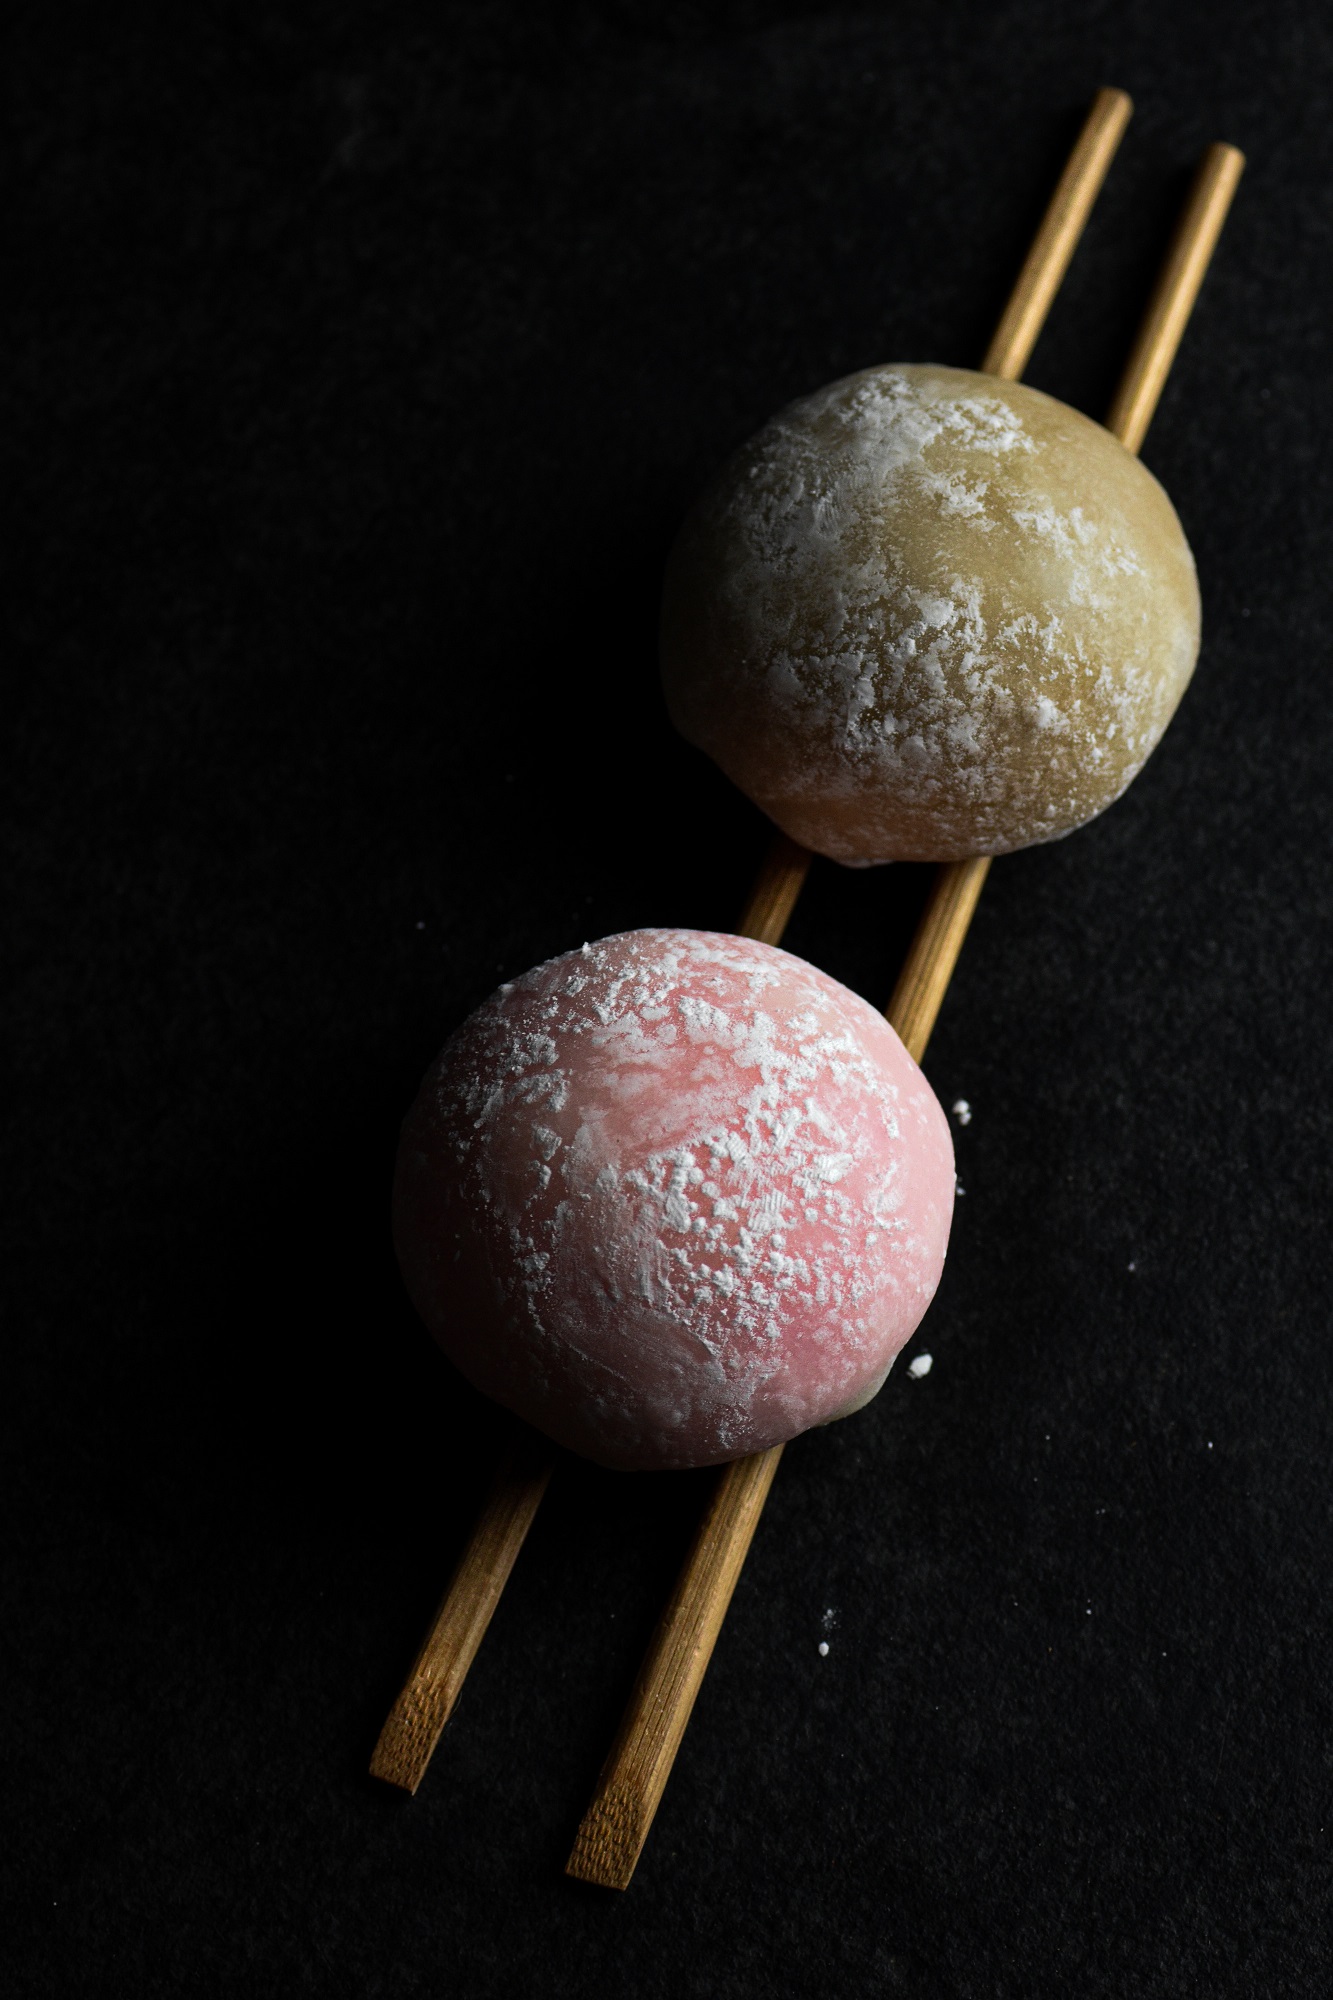 Making mochi the easy way - Japanese Build a Meal Food Blog